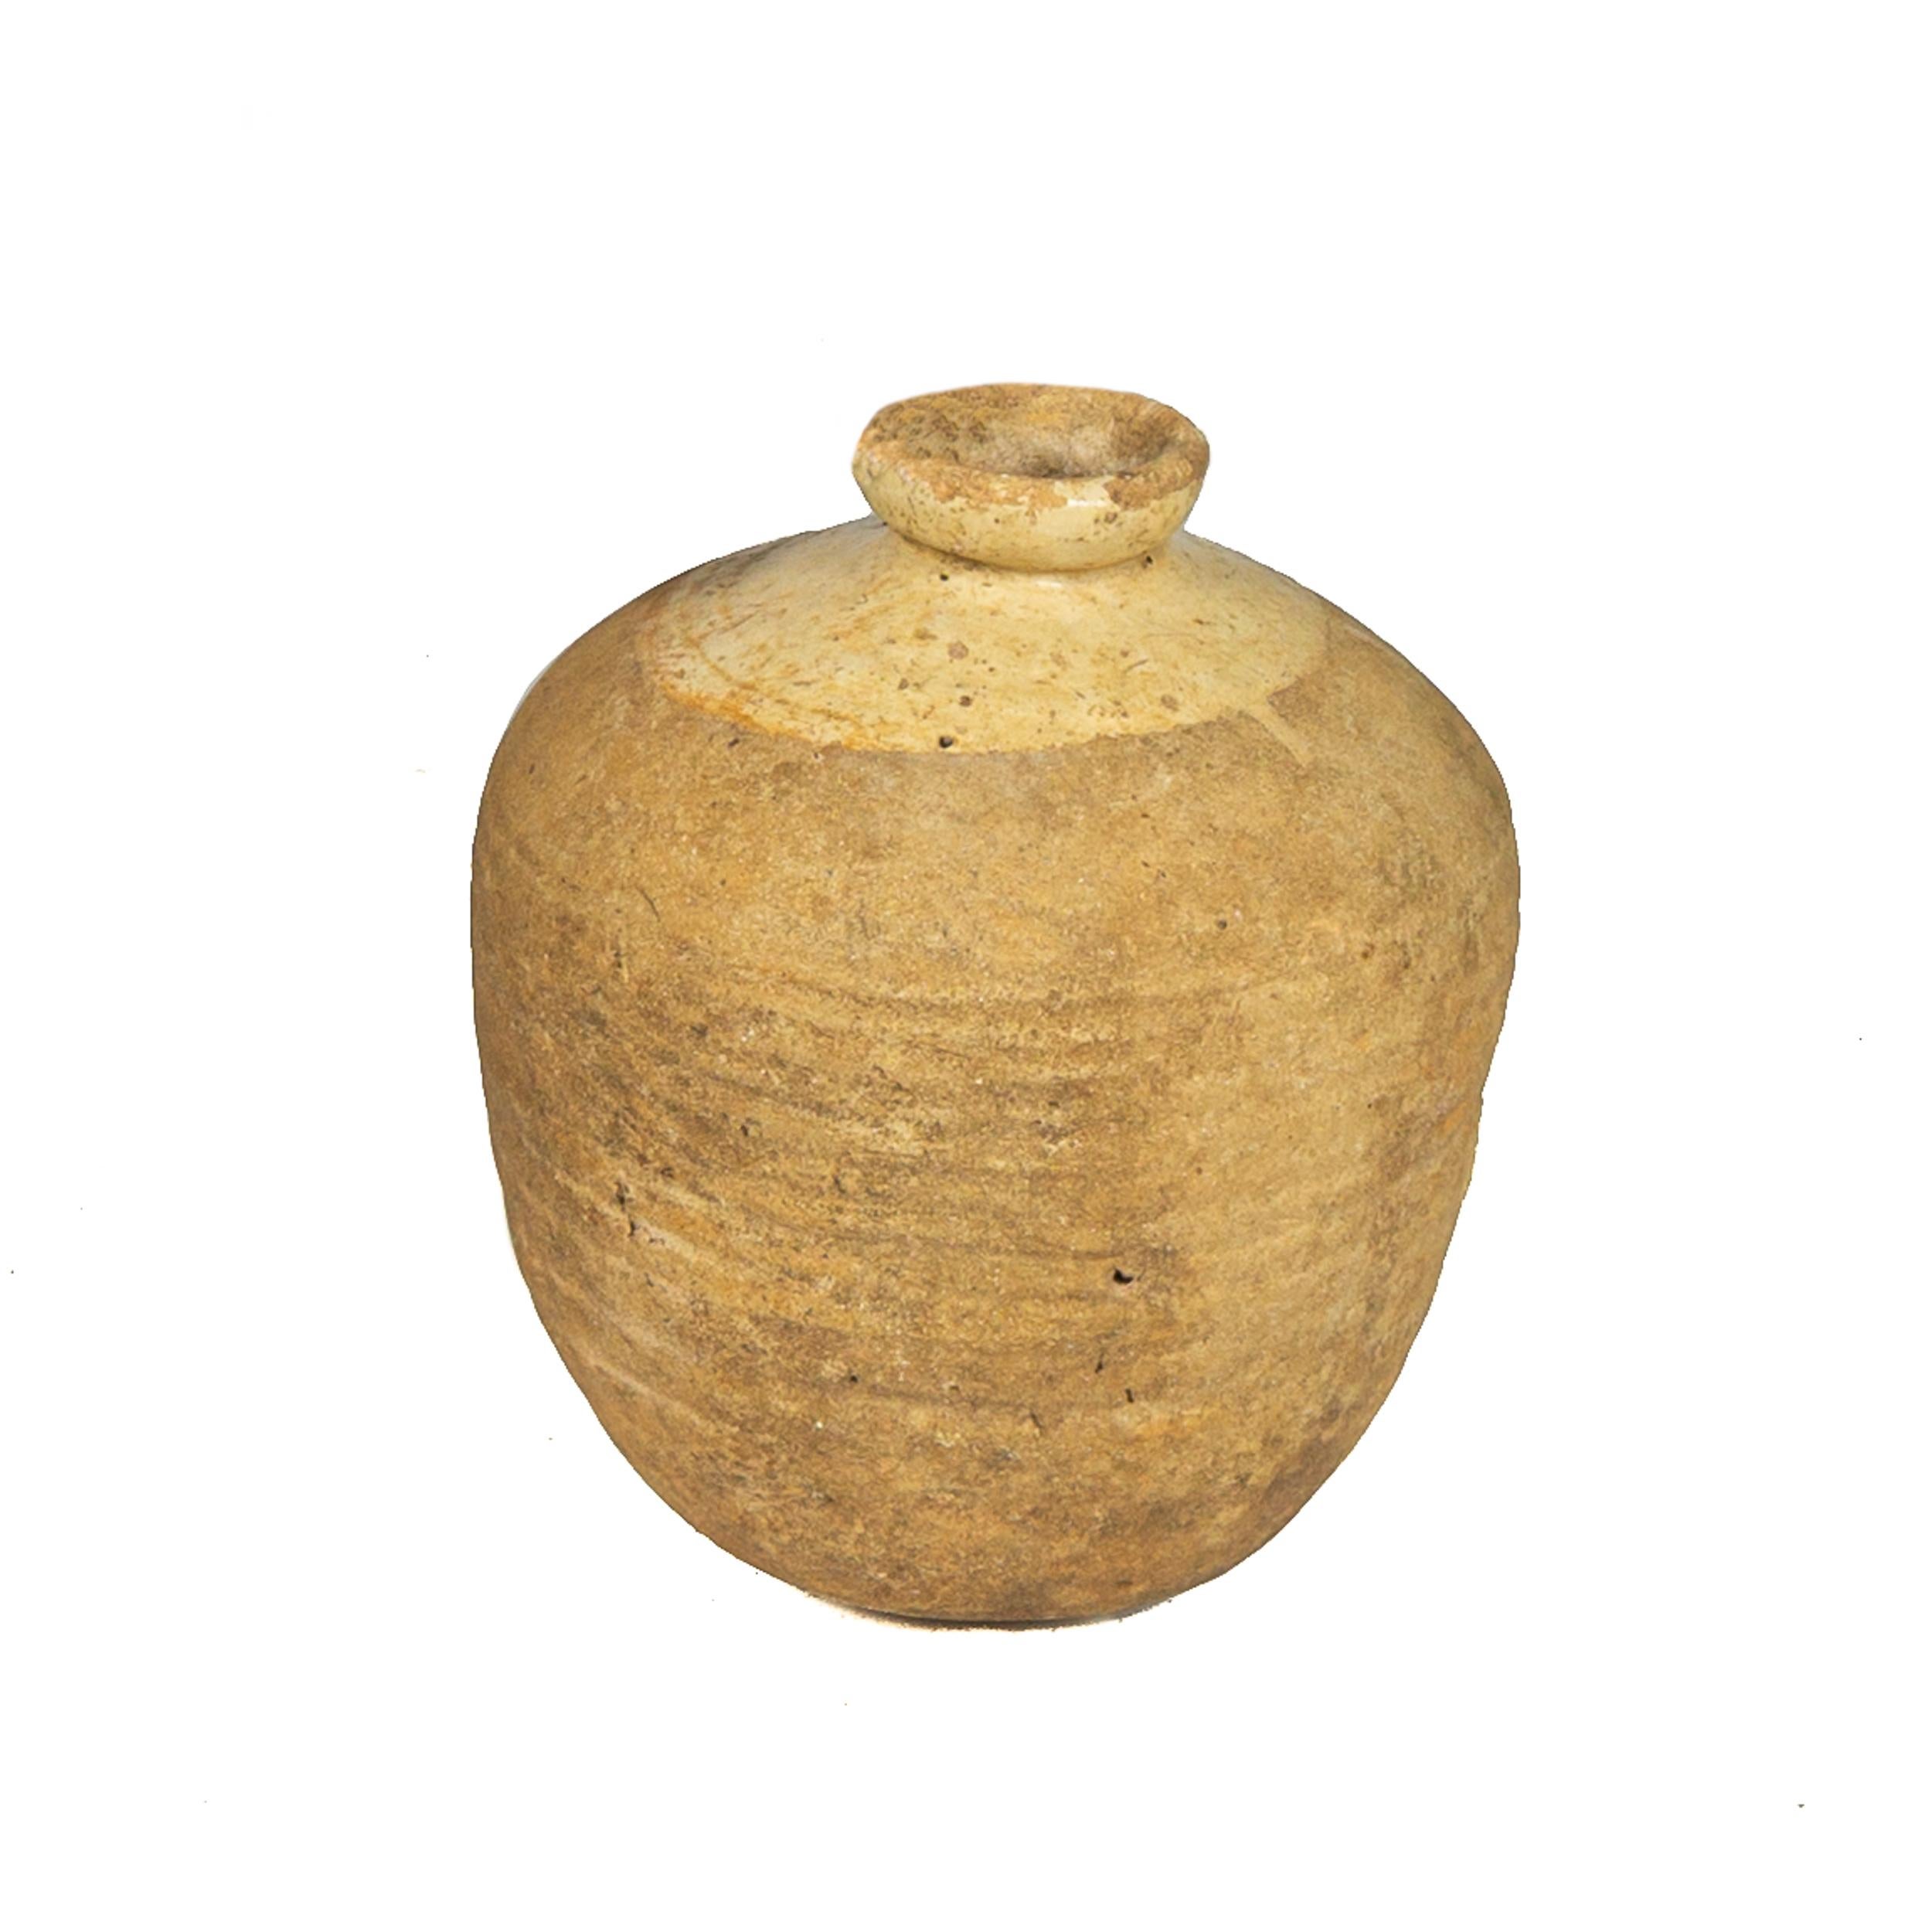 This elegant antique jar was hand-crafted in Spain circa 1760; round in shape with narrow base and neck, the vessel features a rolled rim at the top accented with a mustard color glaze finish. The spanish piece is in excellent condition with